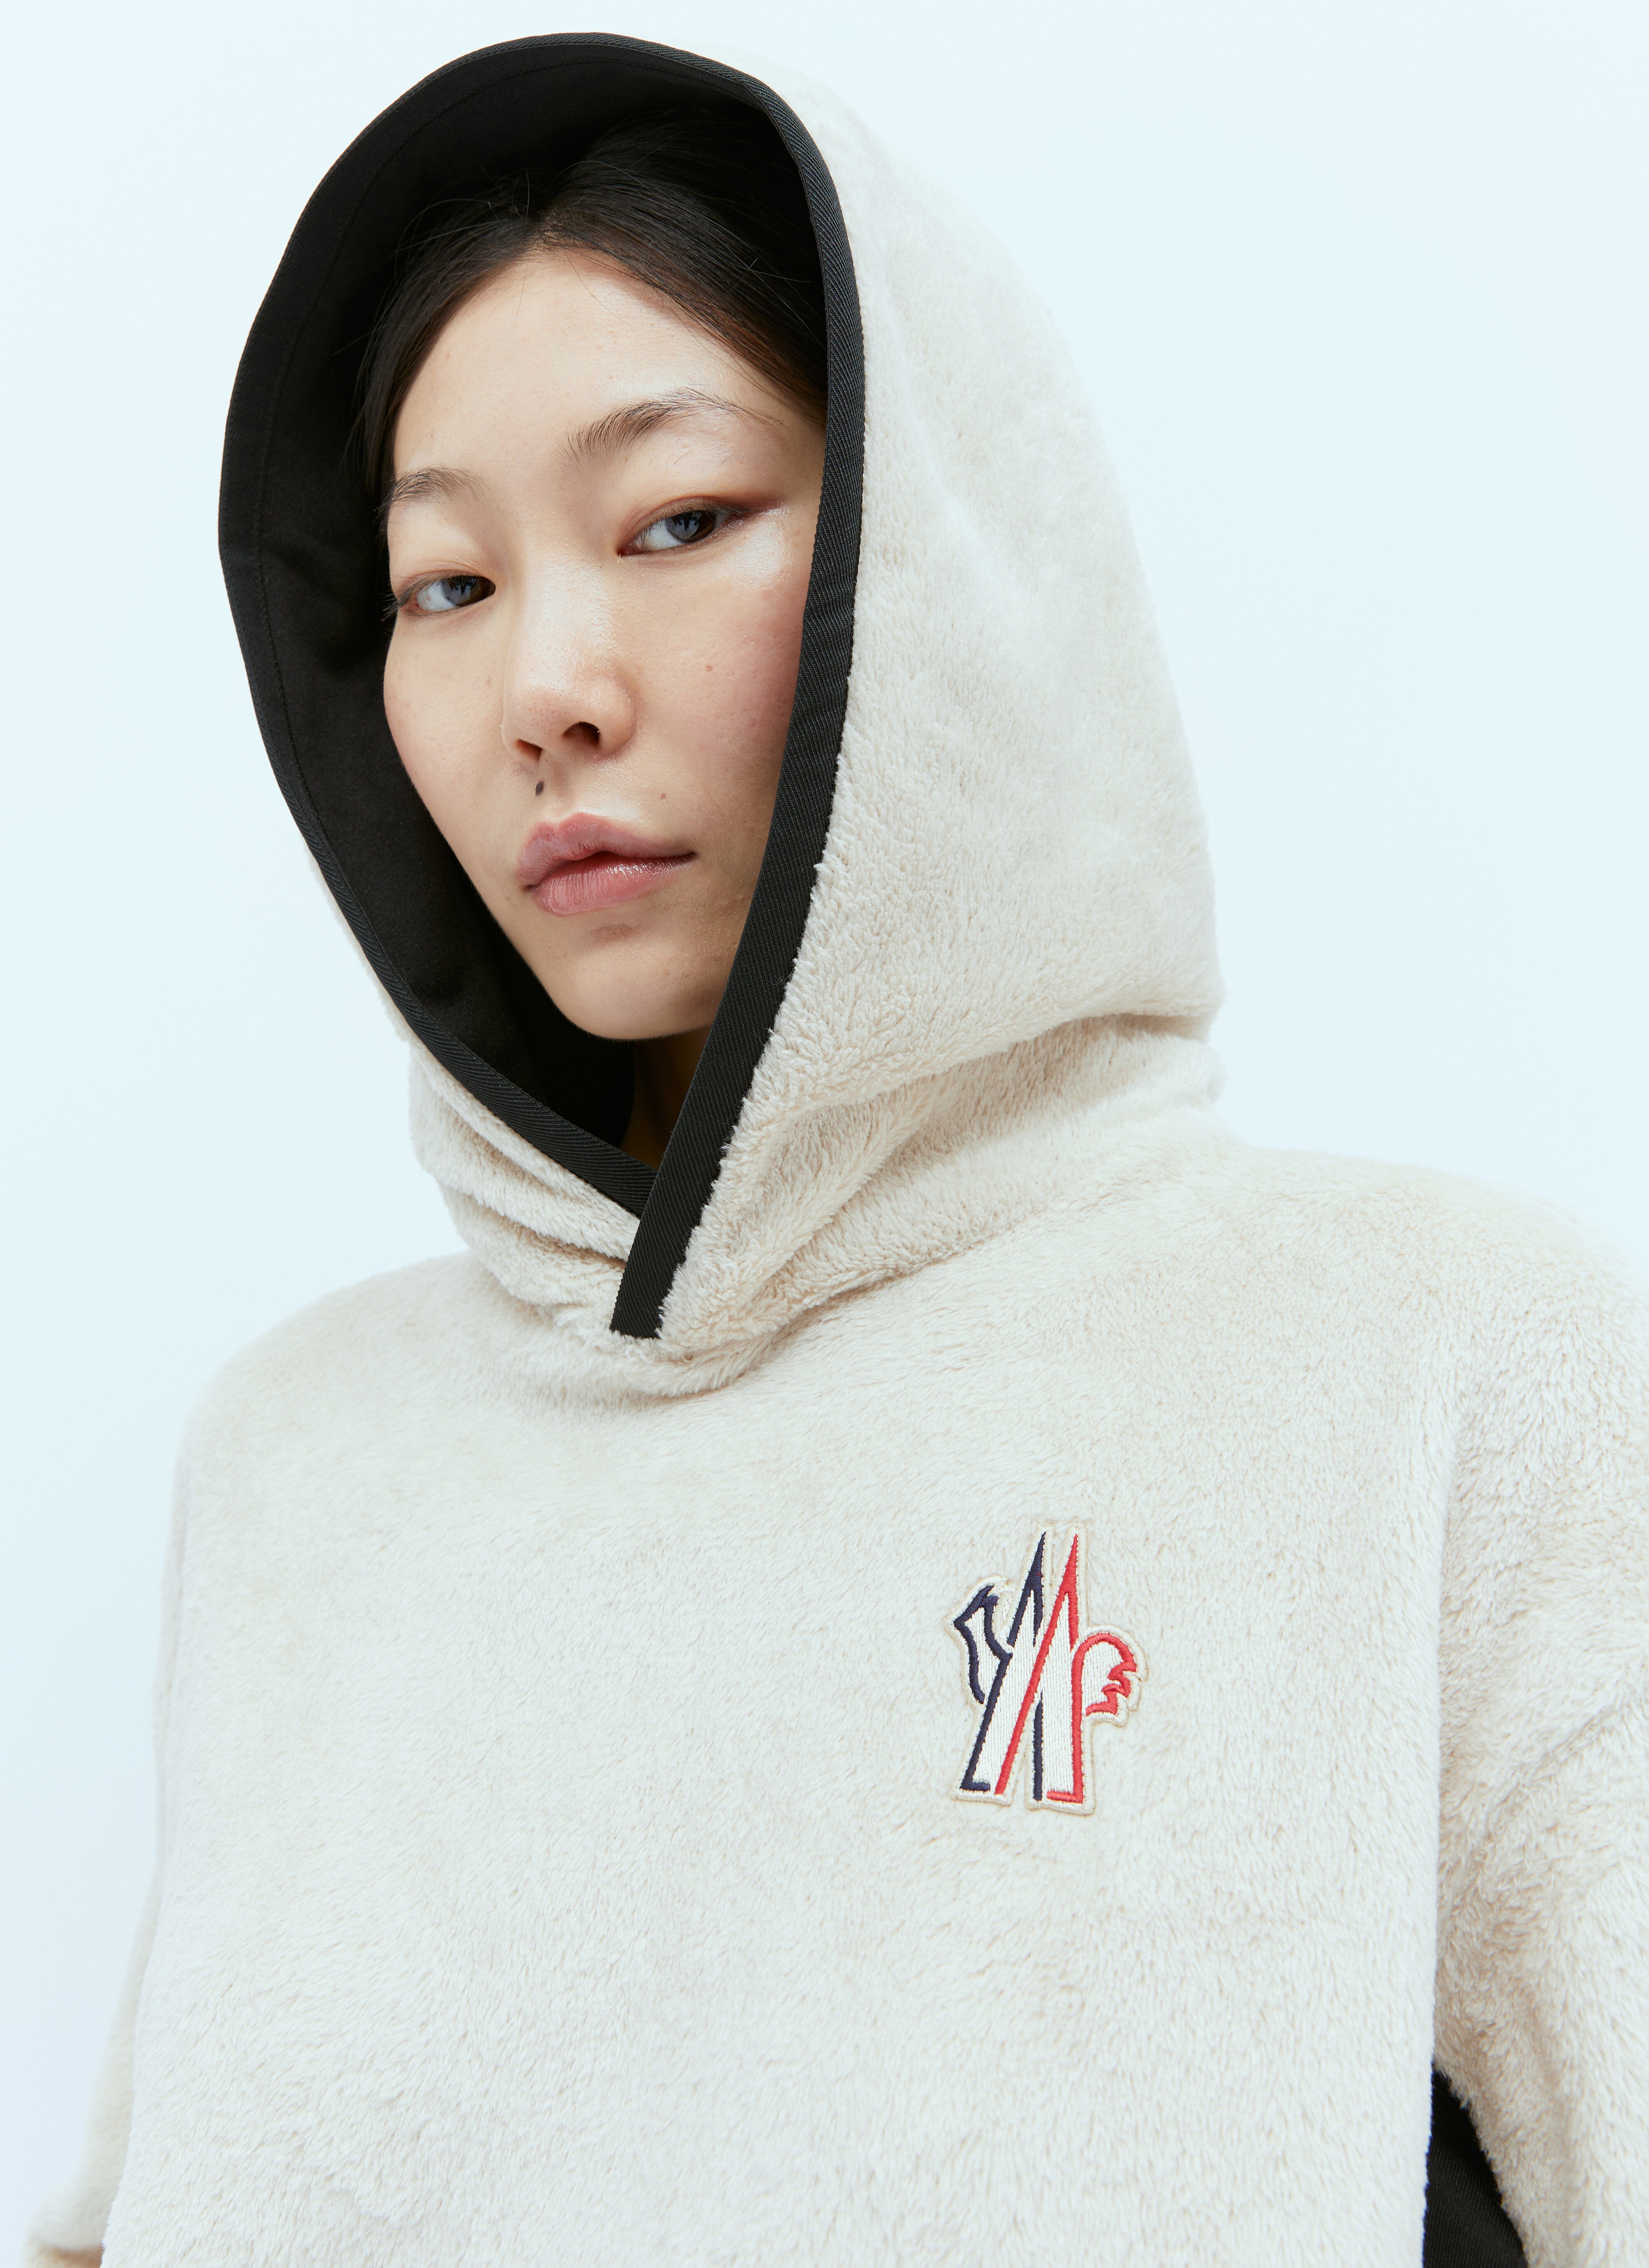 Sweatshirts & Sweaters Moncler Grenoble - Quilted nylon logo